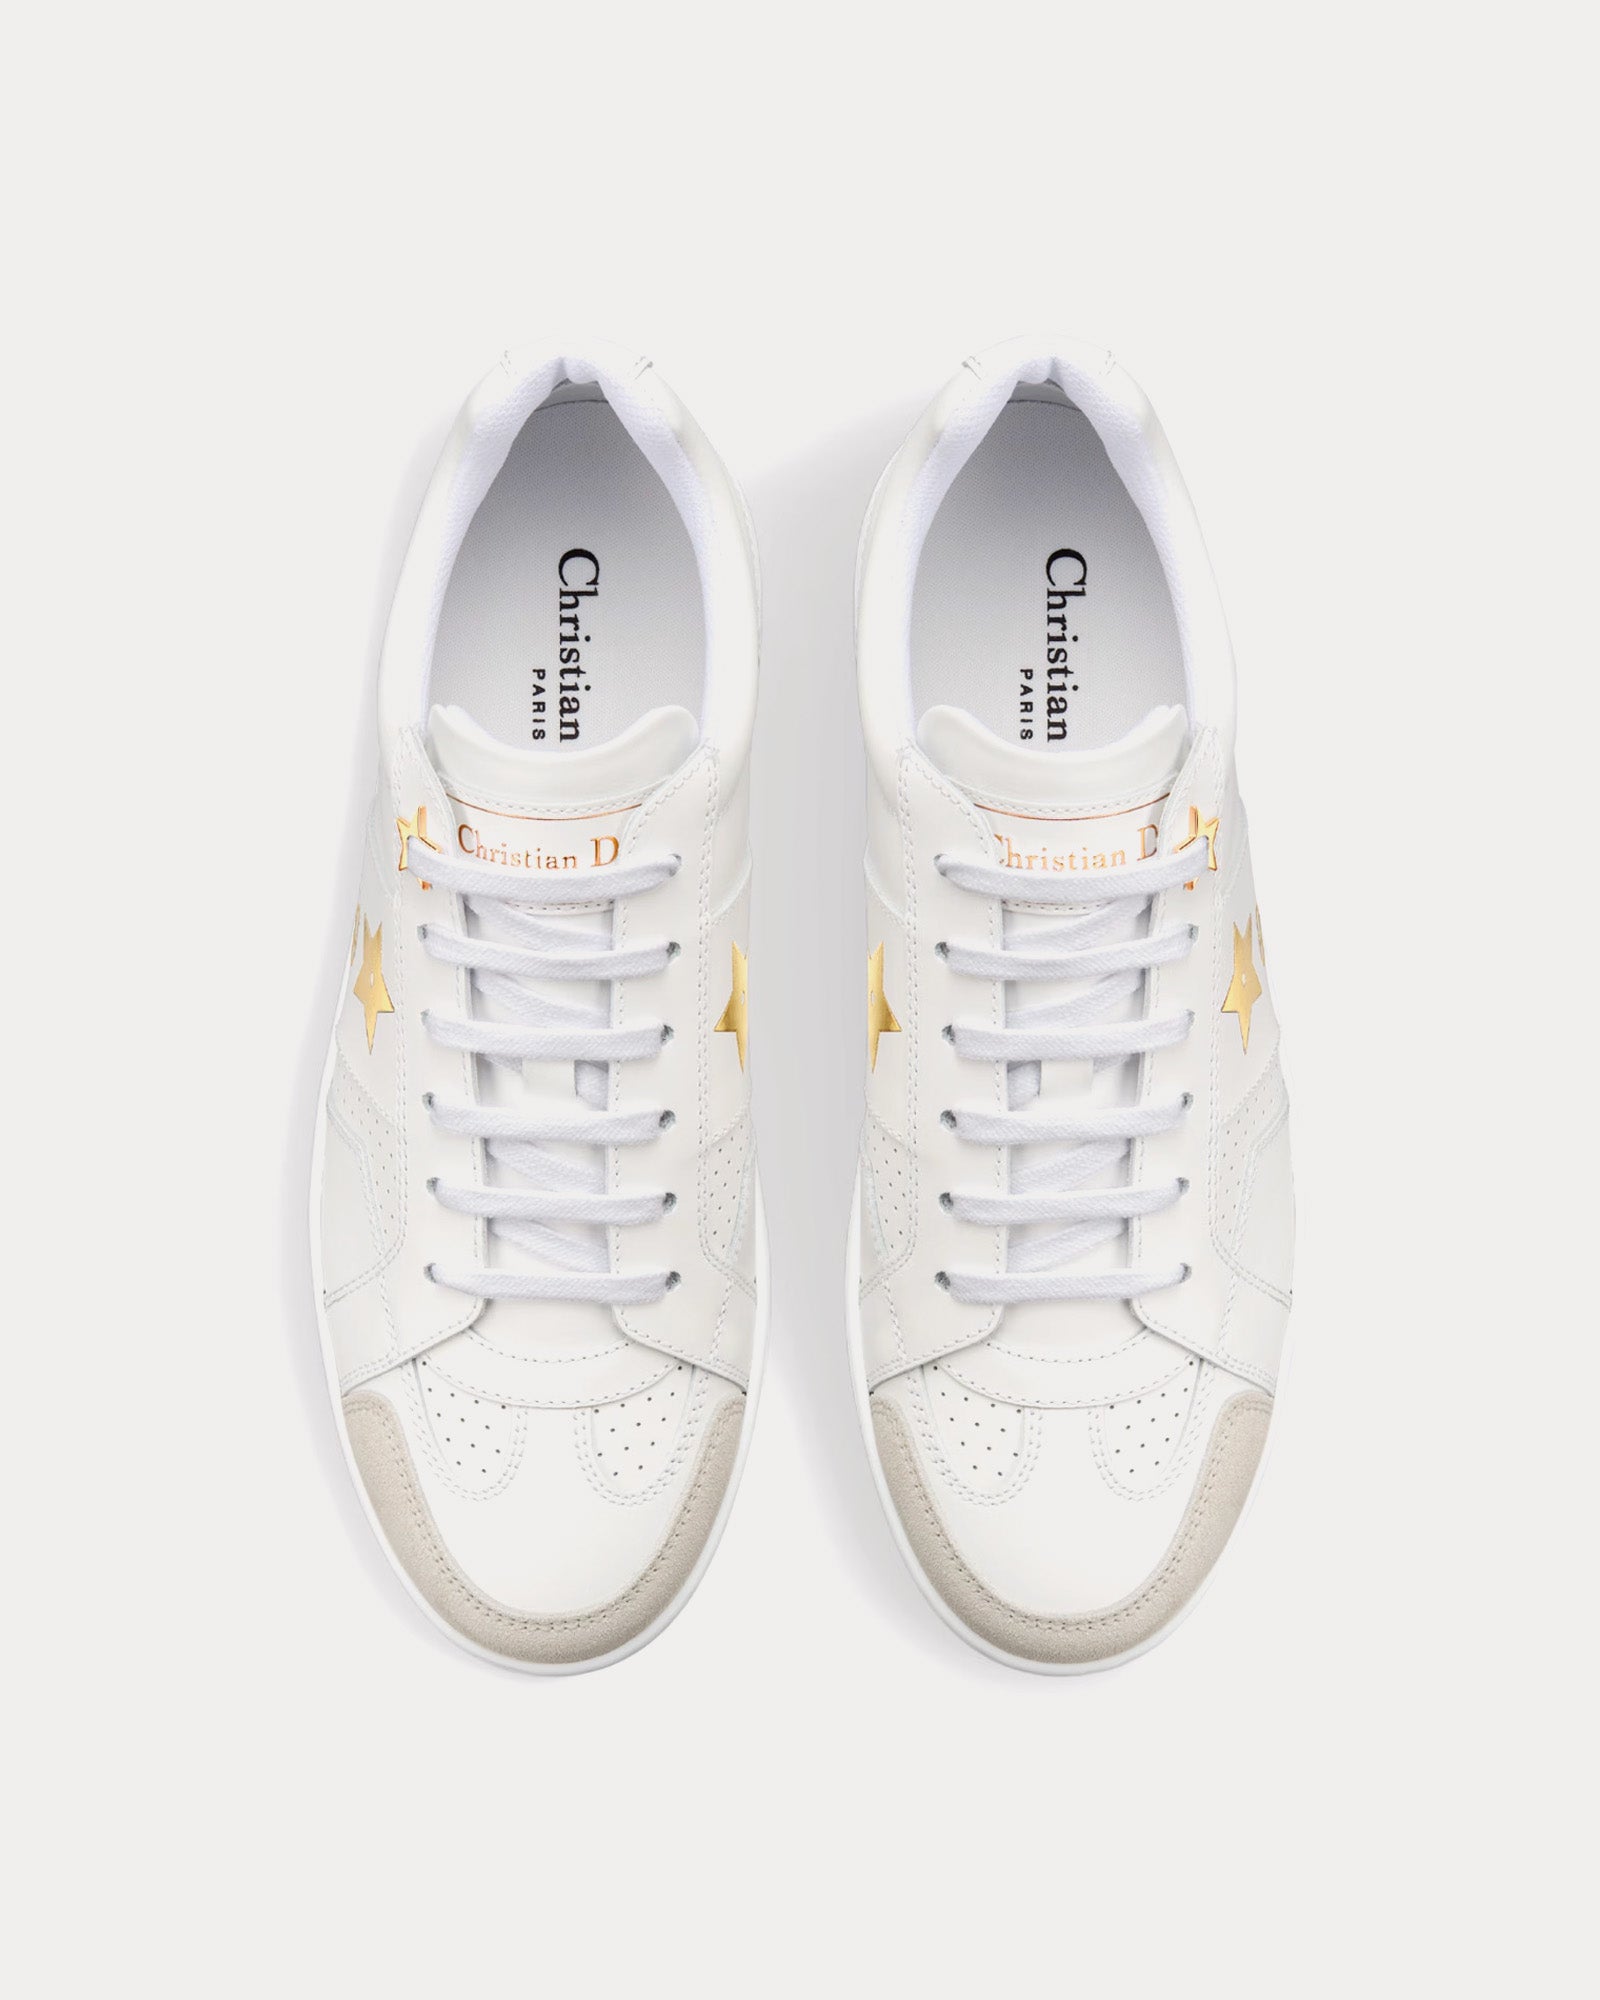 Dior - Dior Star Calfskin & Suede White / Gold Low Top Sneakers